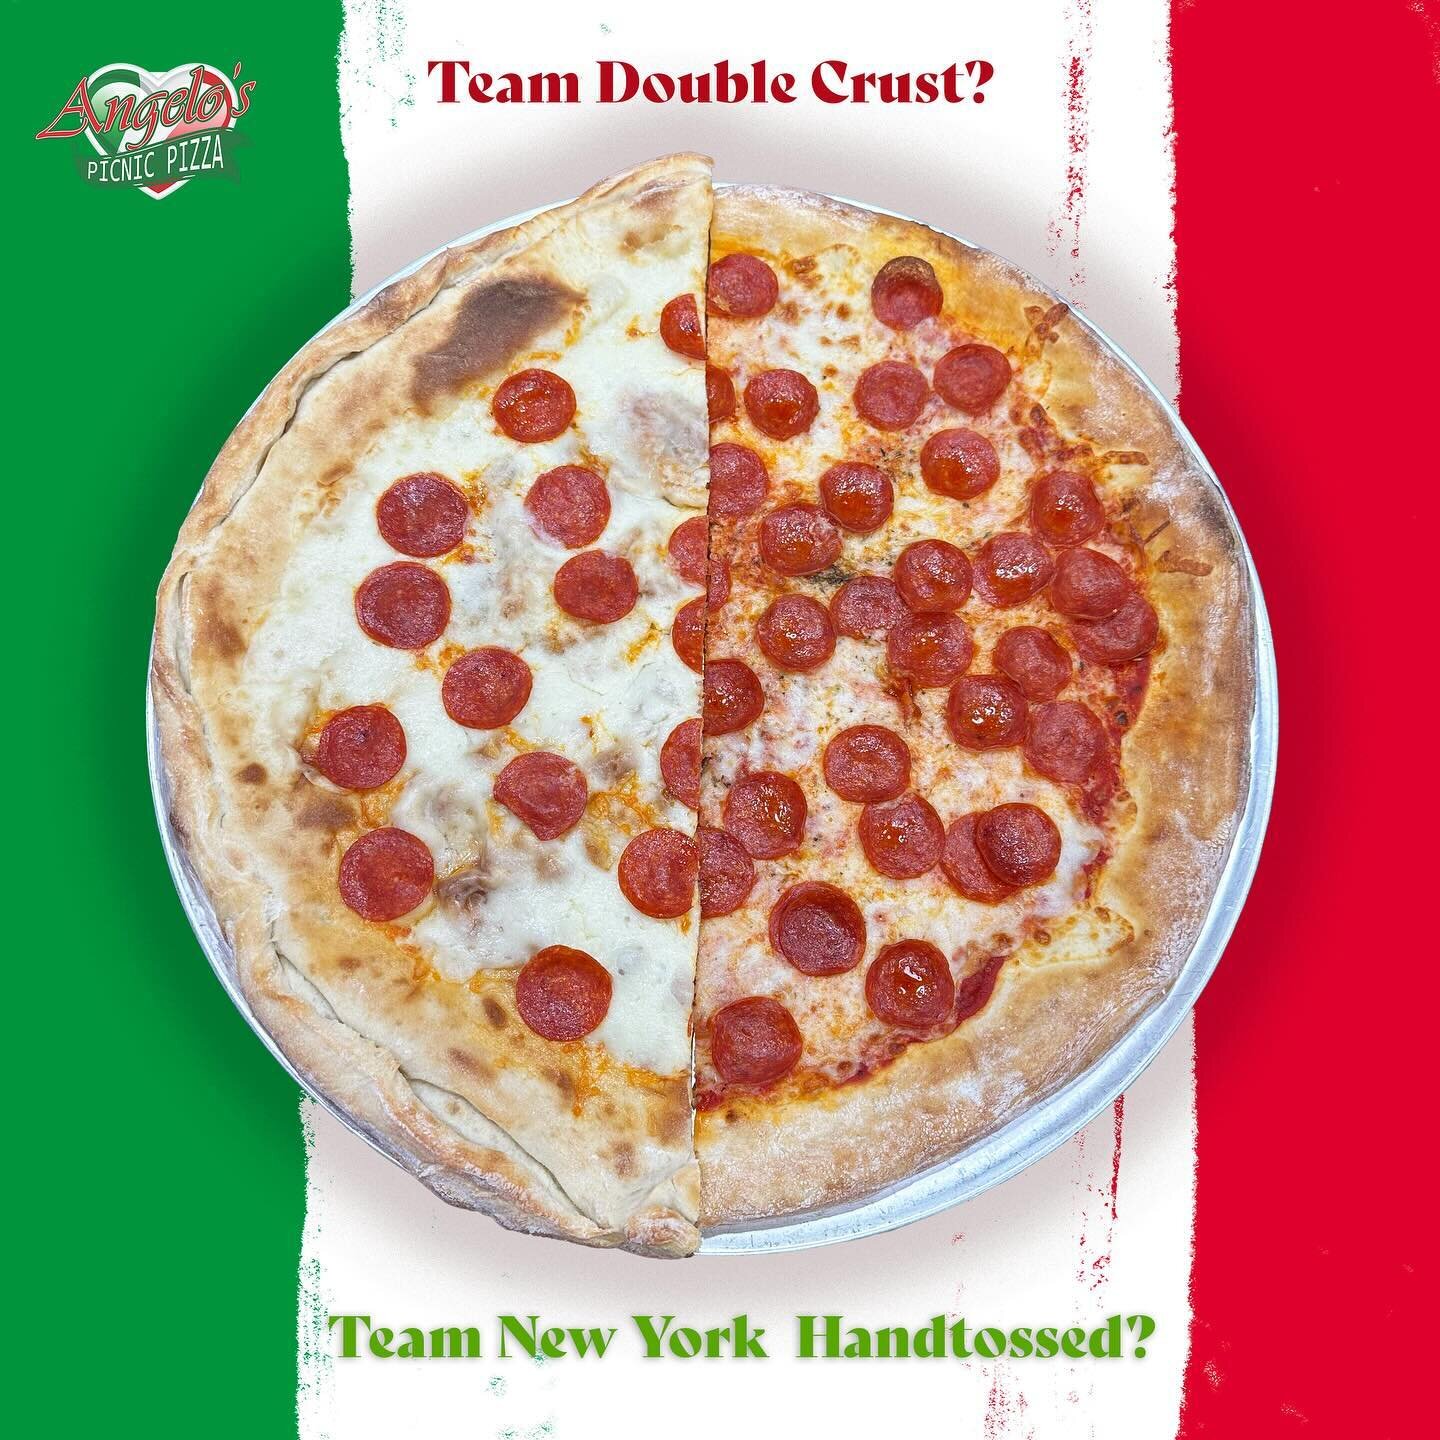 Football season is ongoing but the real feud needs to be resolved&hellip; which one are you picking? 👀 

#angelospicnicpizza #pizza #nfl #football #nystylepizza #smyrna #tennessee